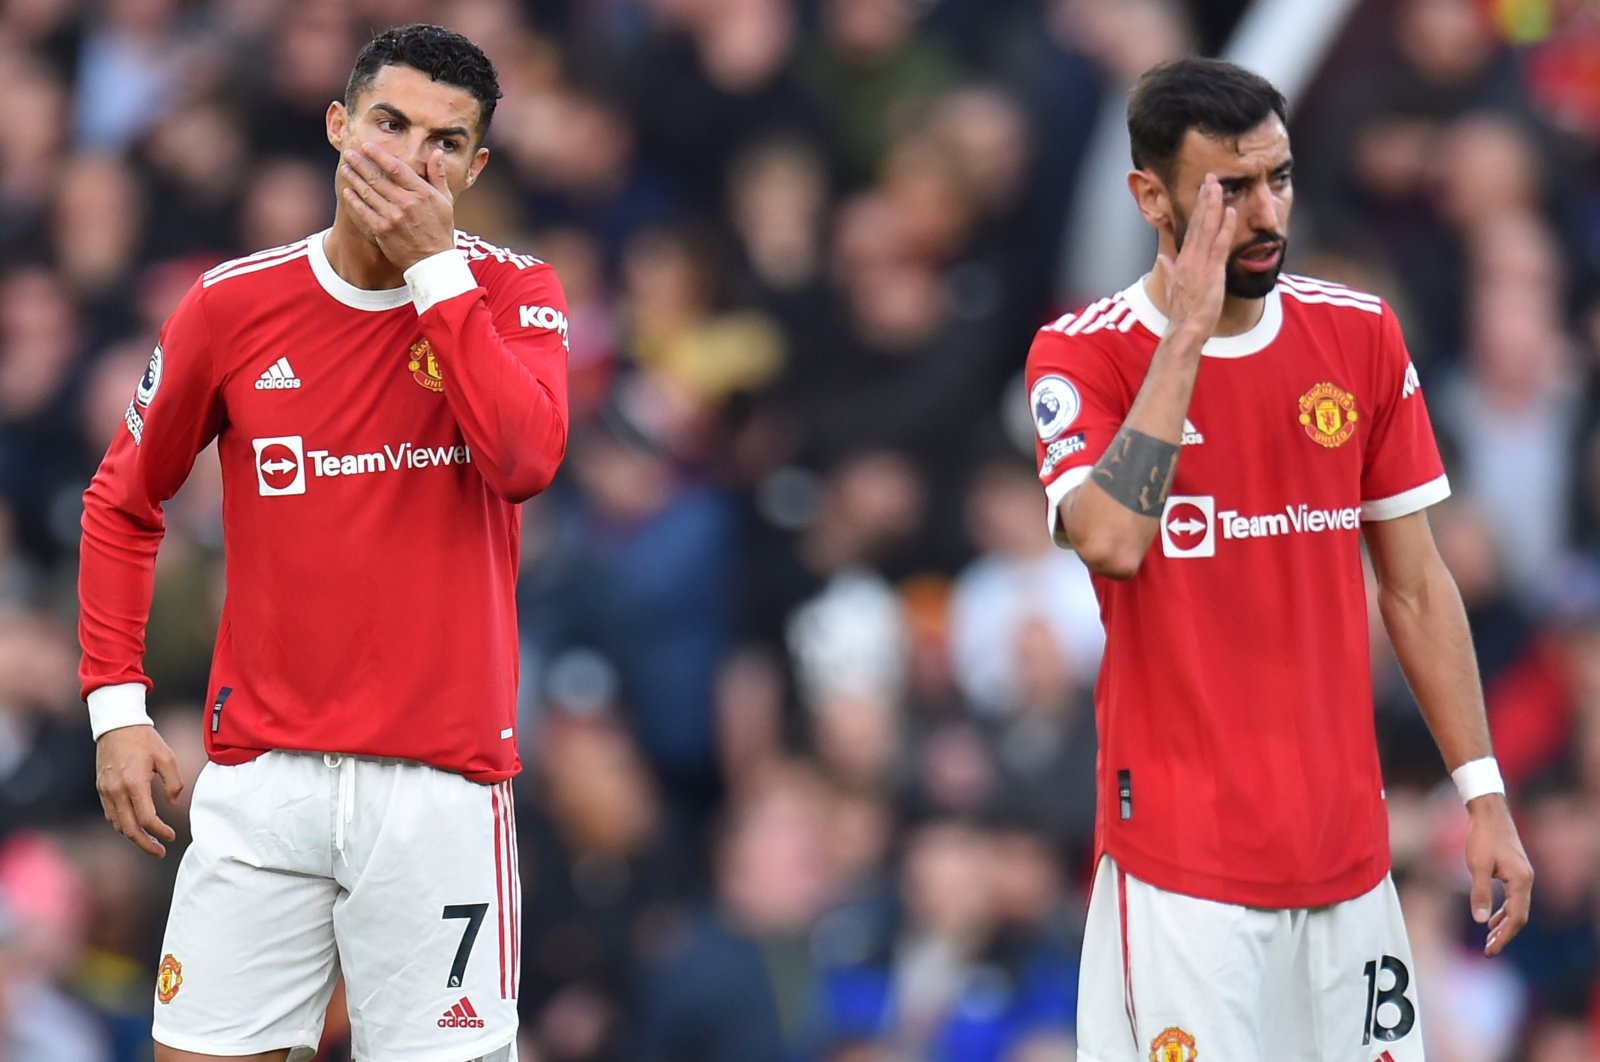 Manchester United's Cristiano Ronaldo (L) and Bruno Fernandes (R) react during a Premier League match against Liverpool in Manchester, England, Oct. 24, 2021. (EPA Photo)